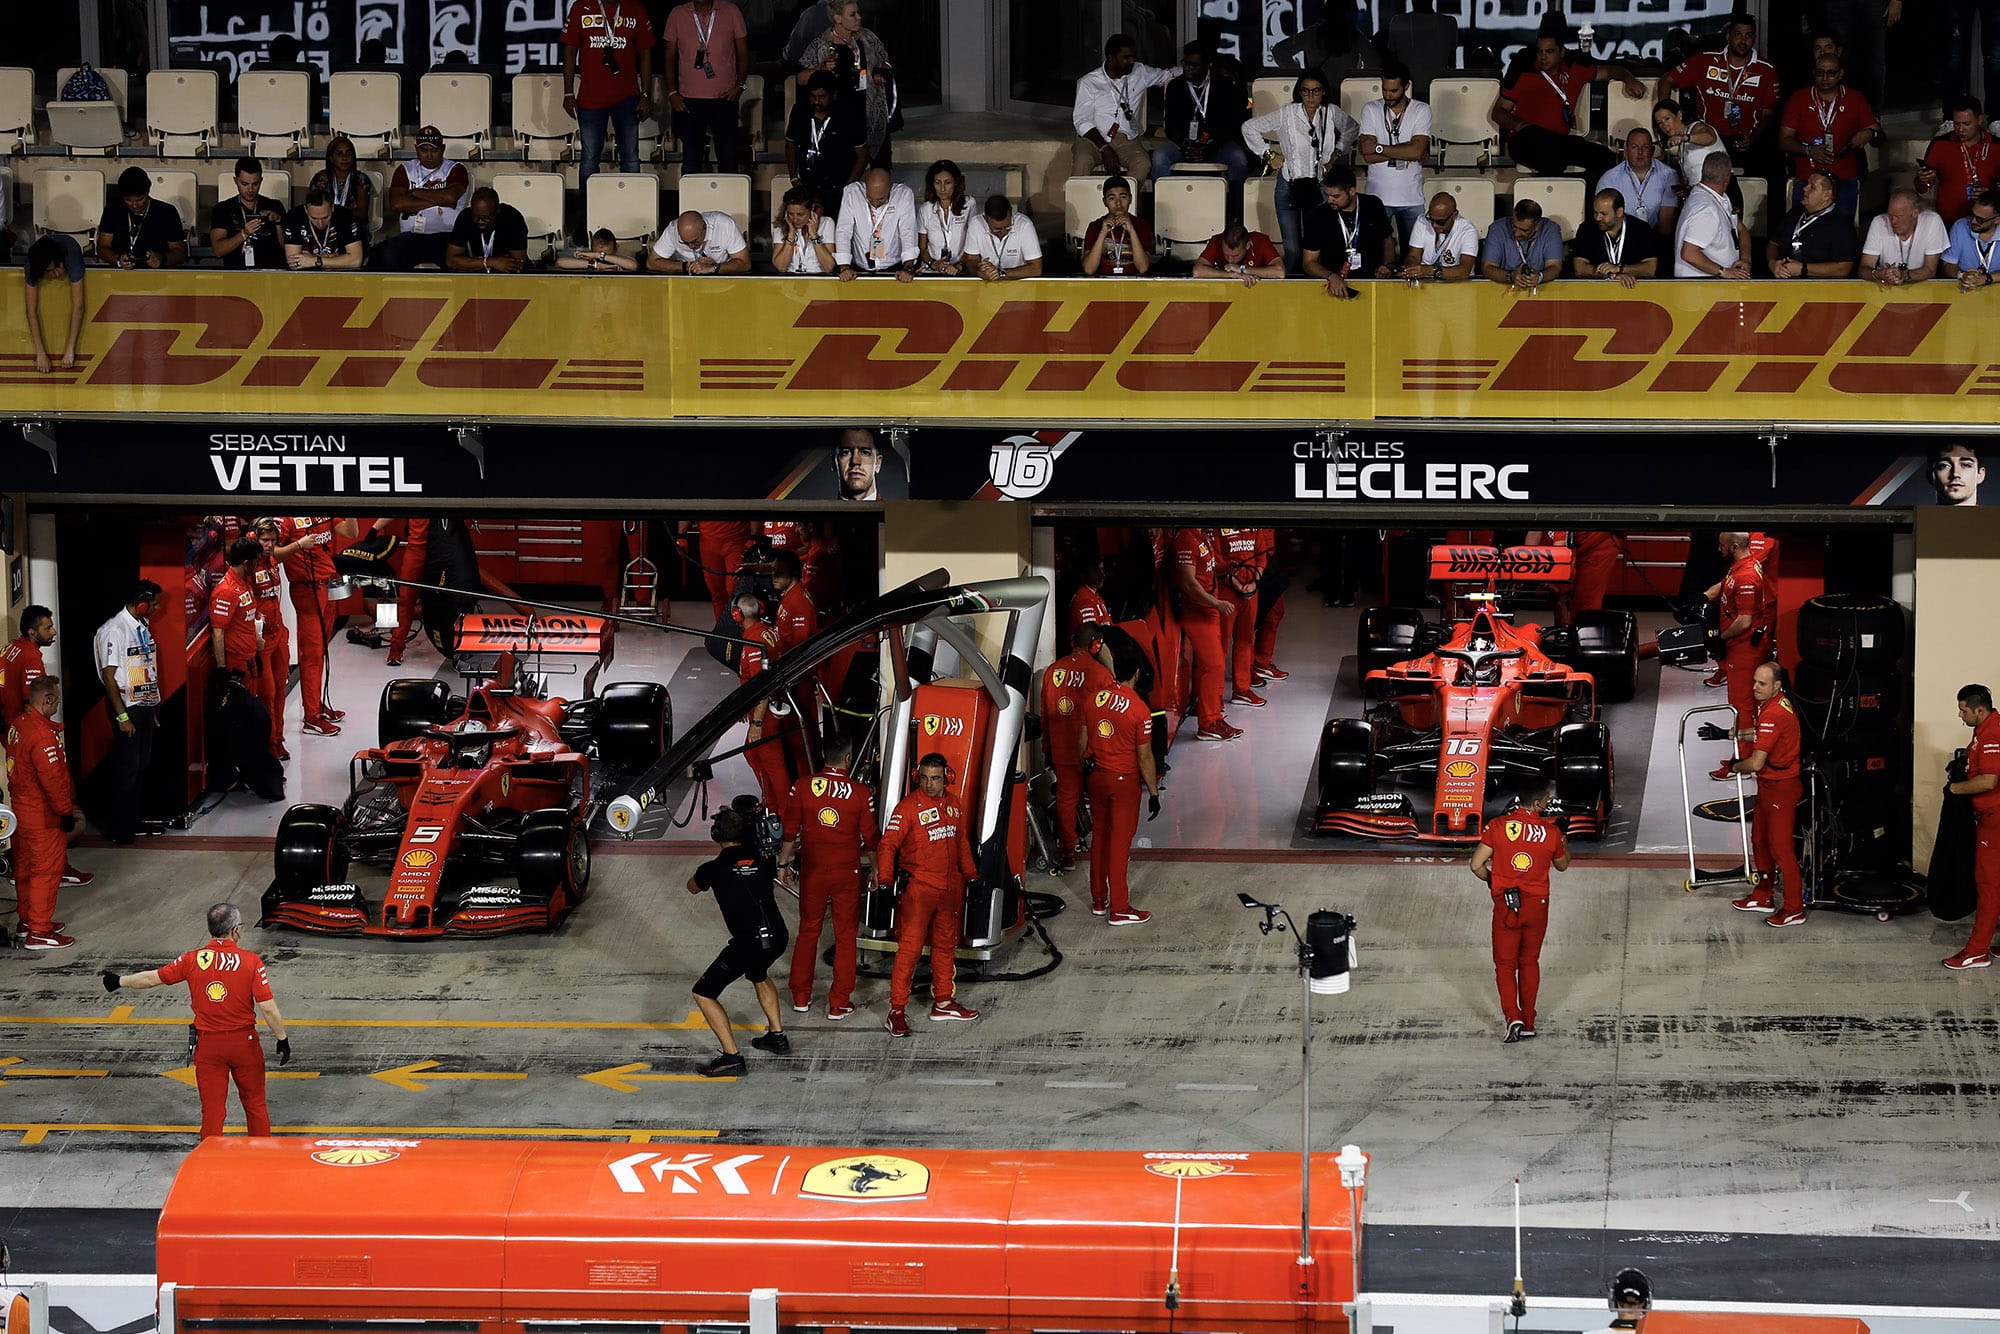 Ferrari releases its cars for another qualifying run at the 2019 Abu Dhabi Grand Prix